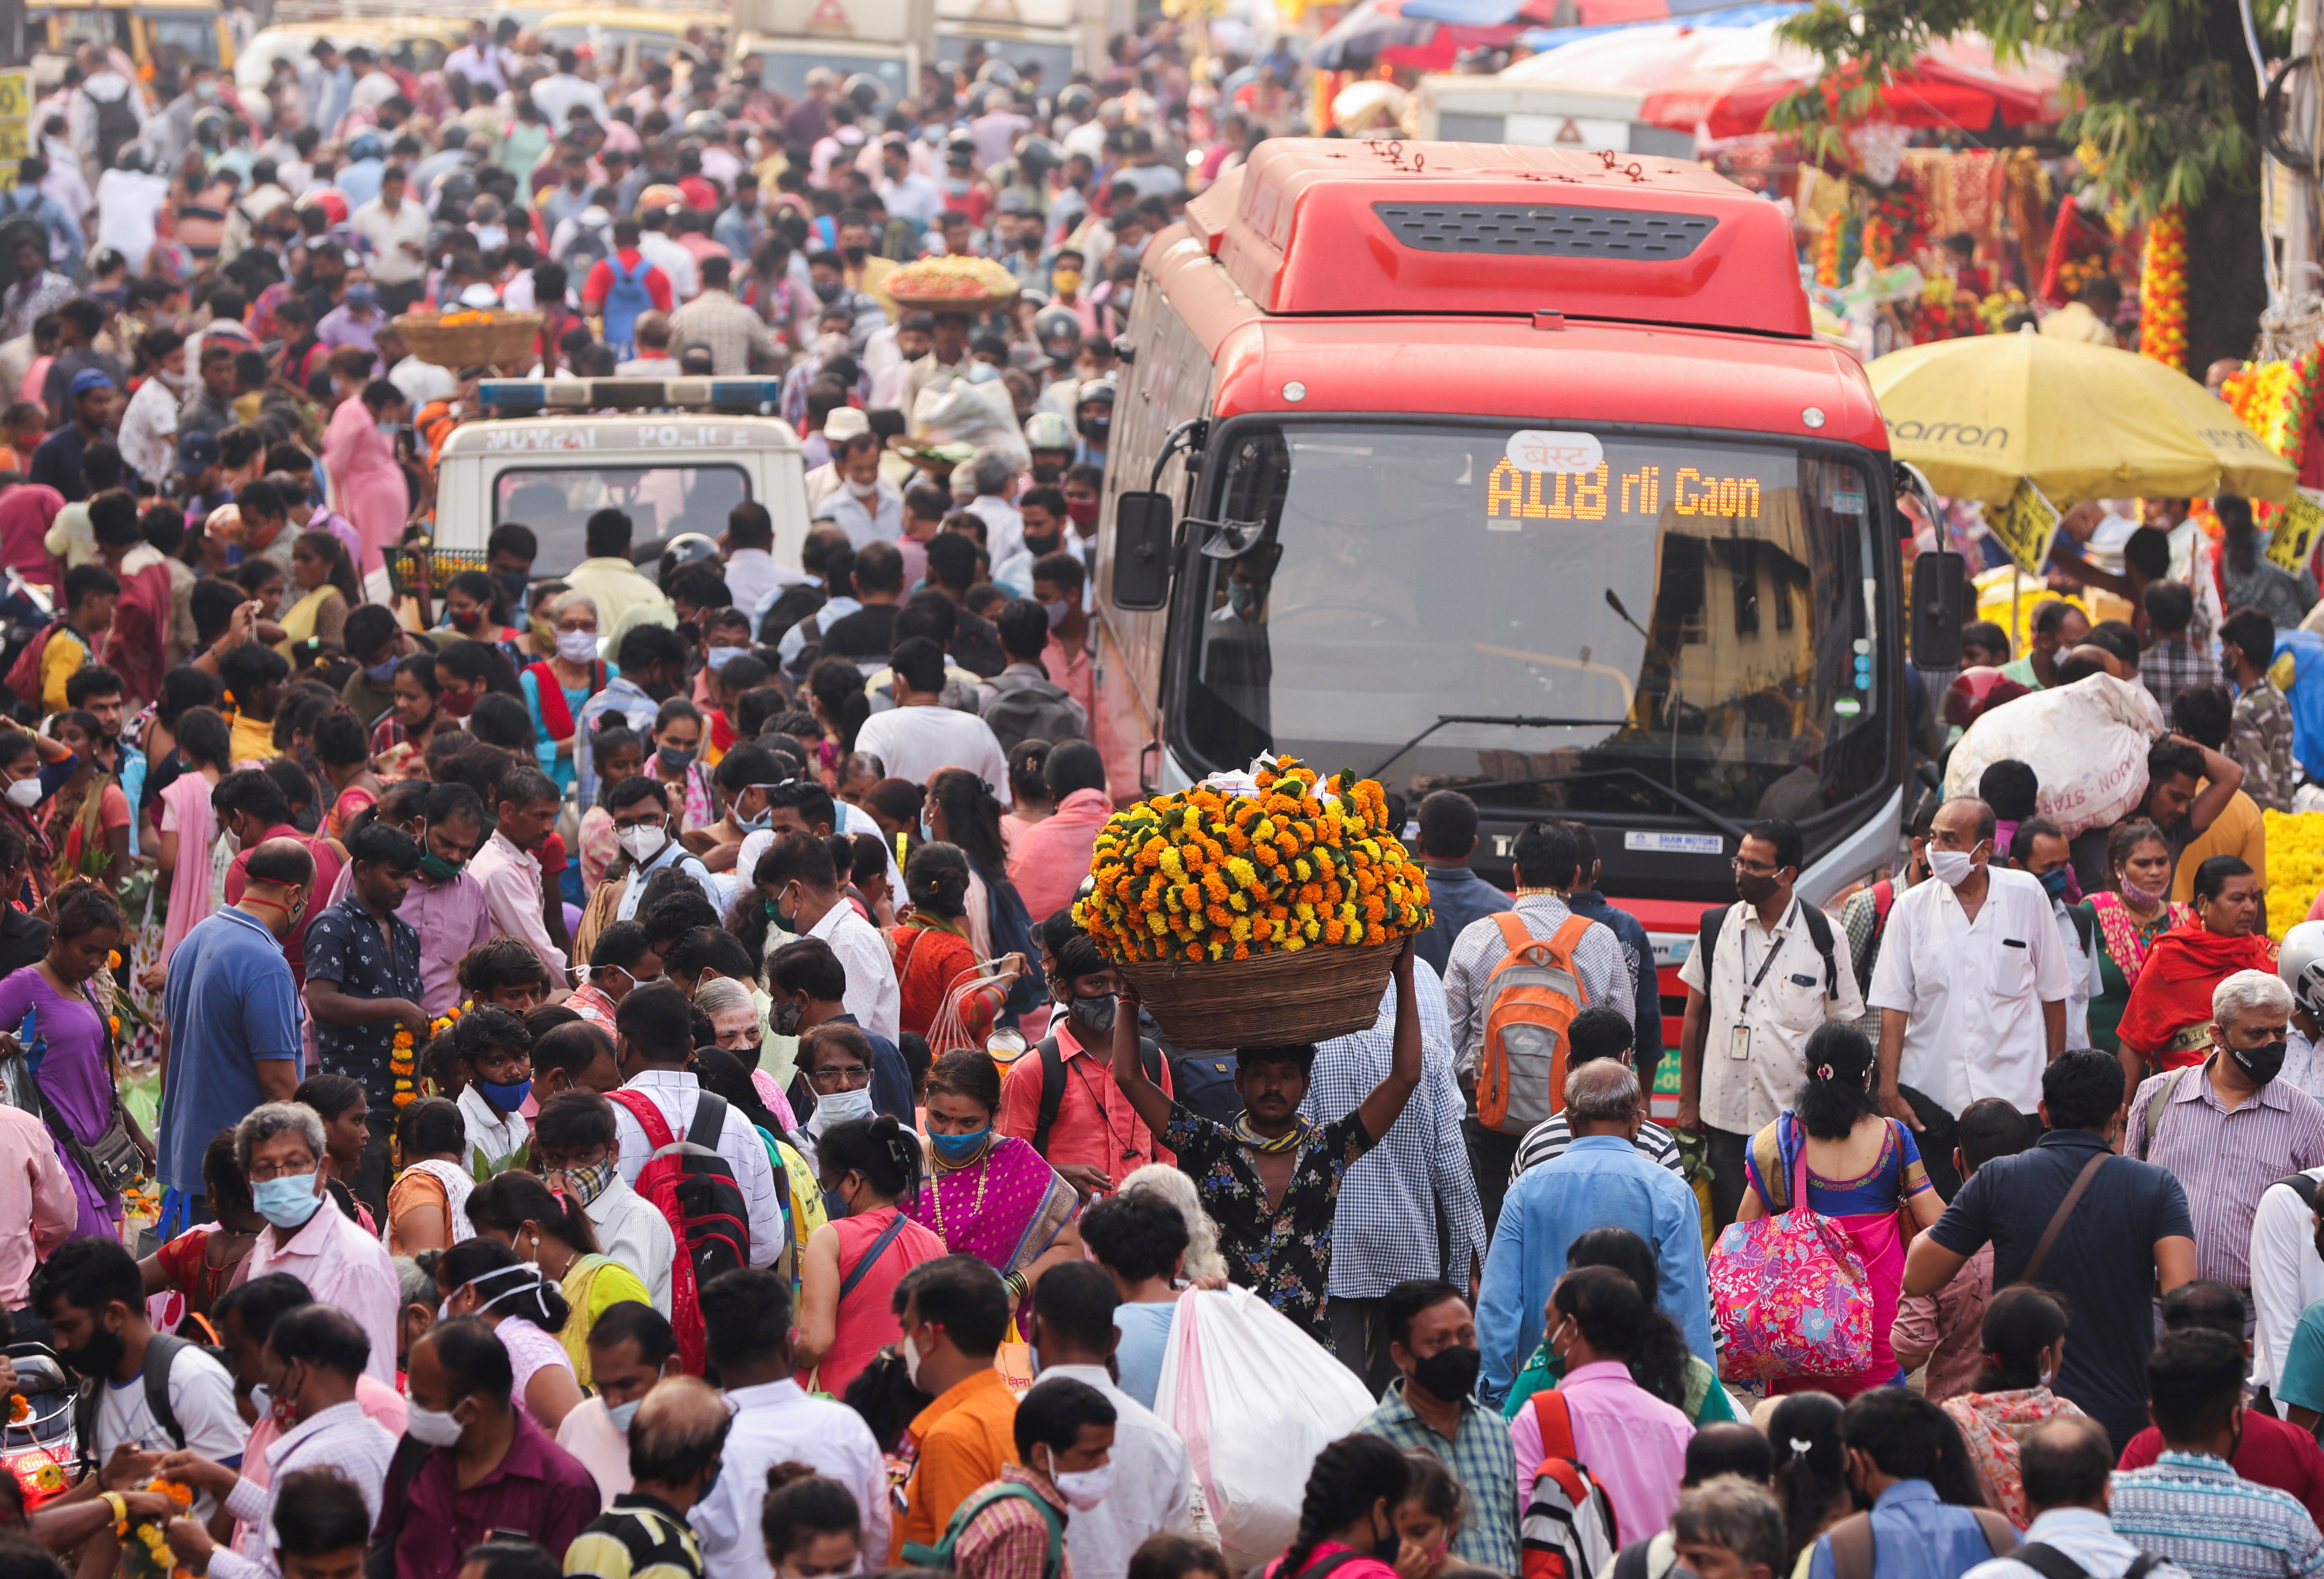 A man carrying flower garlands walks through a crowded market ahead of the religious festival of Dussehra, amidst the spread of the coronavirus disease (COVID-19) in Mumbai